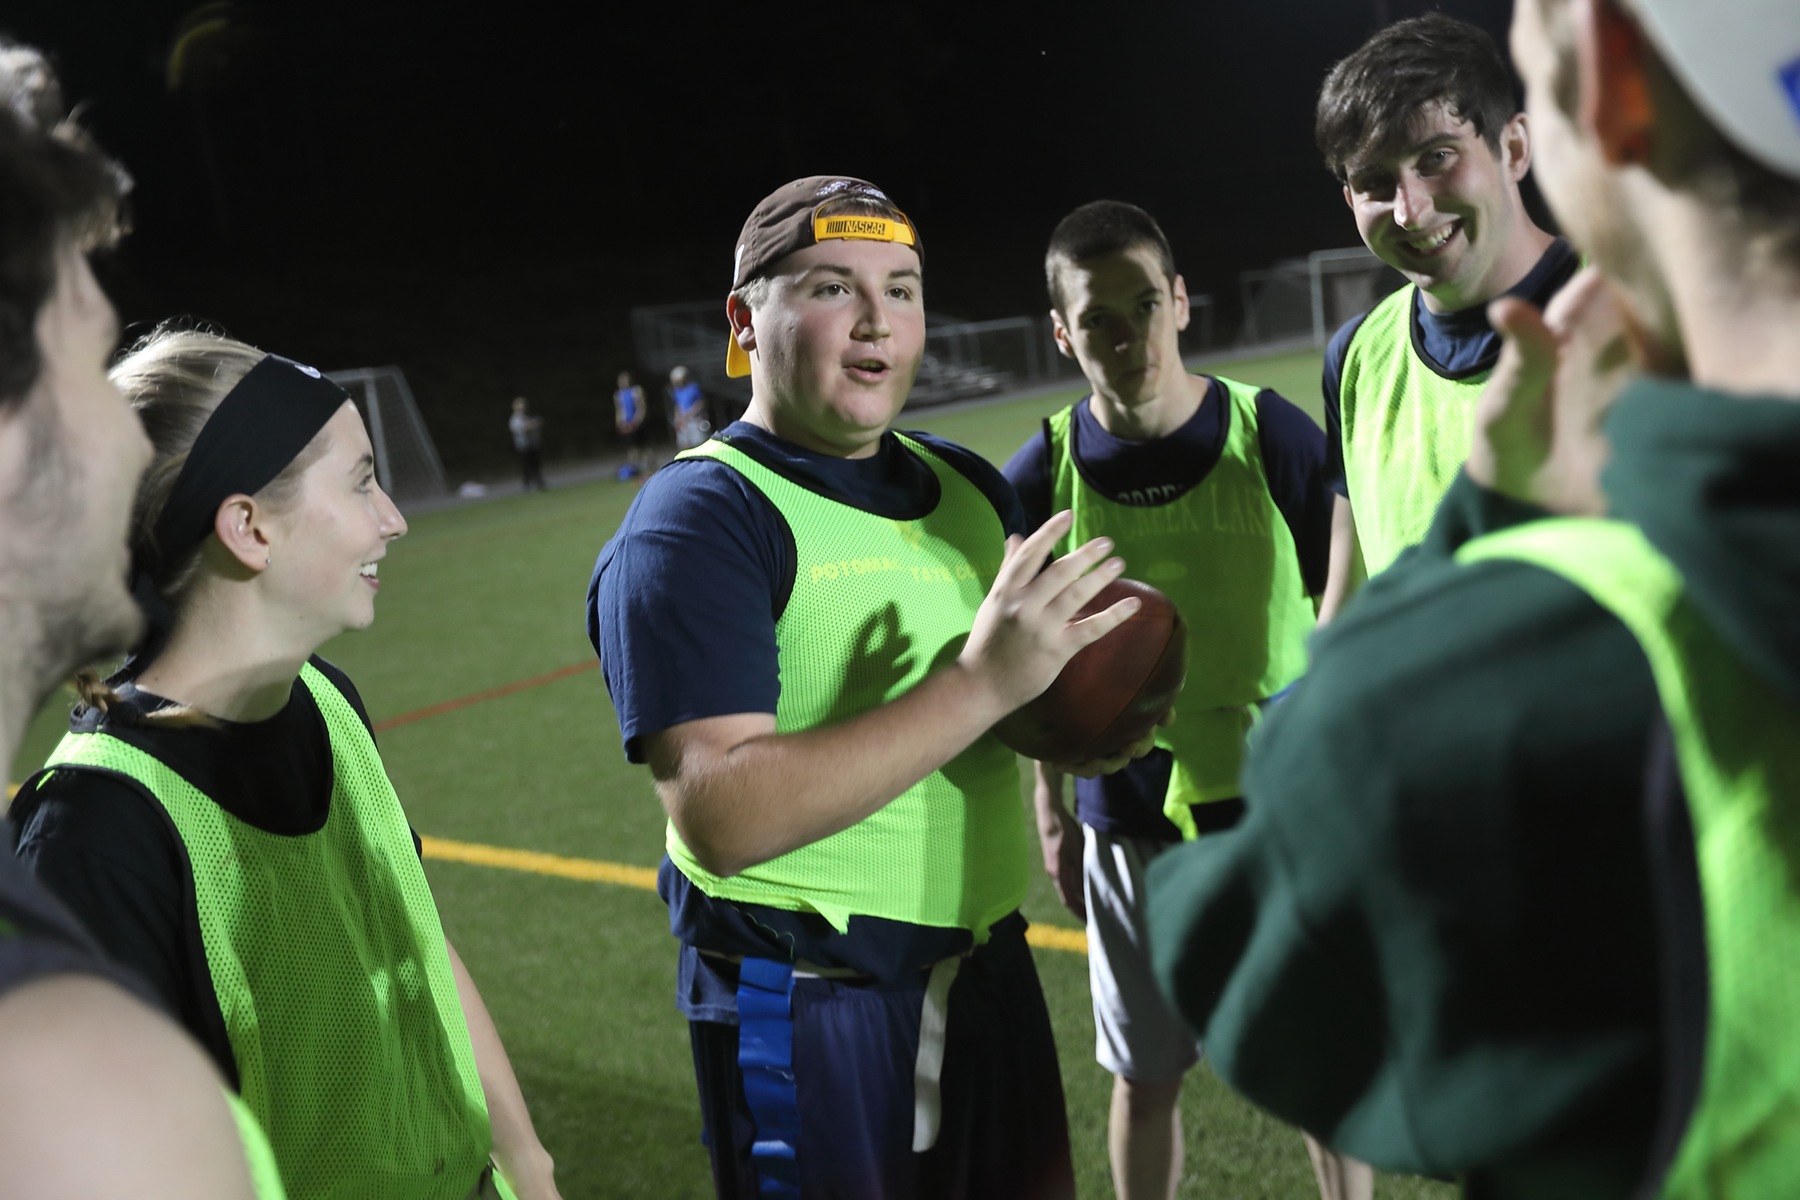 Students conversing on the turf field during a flag football game at WVU Potomac State College